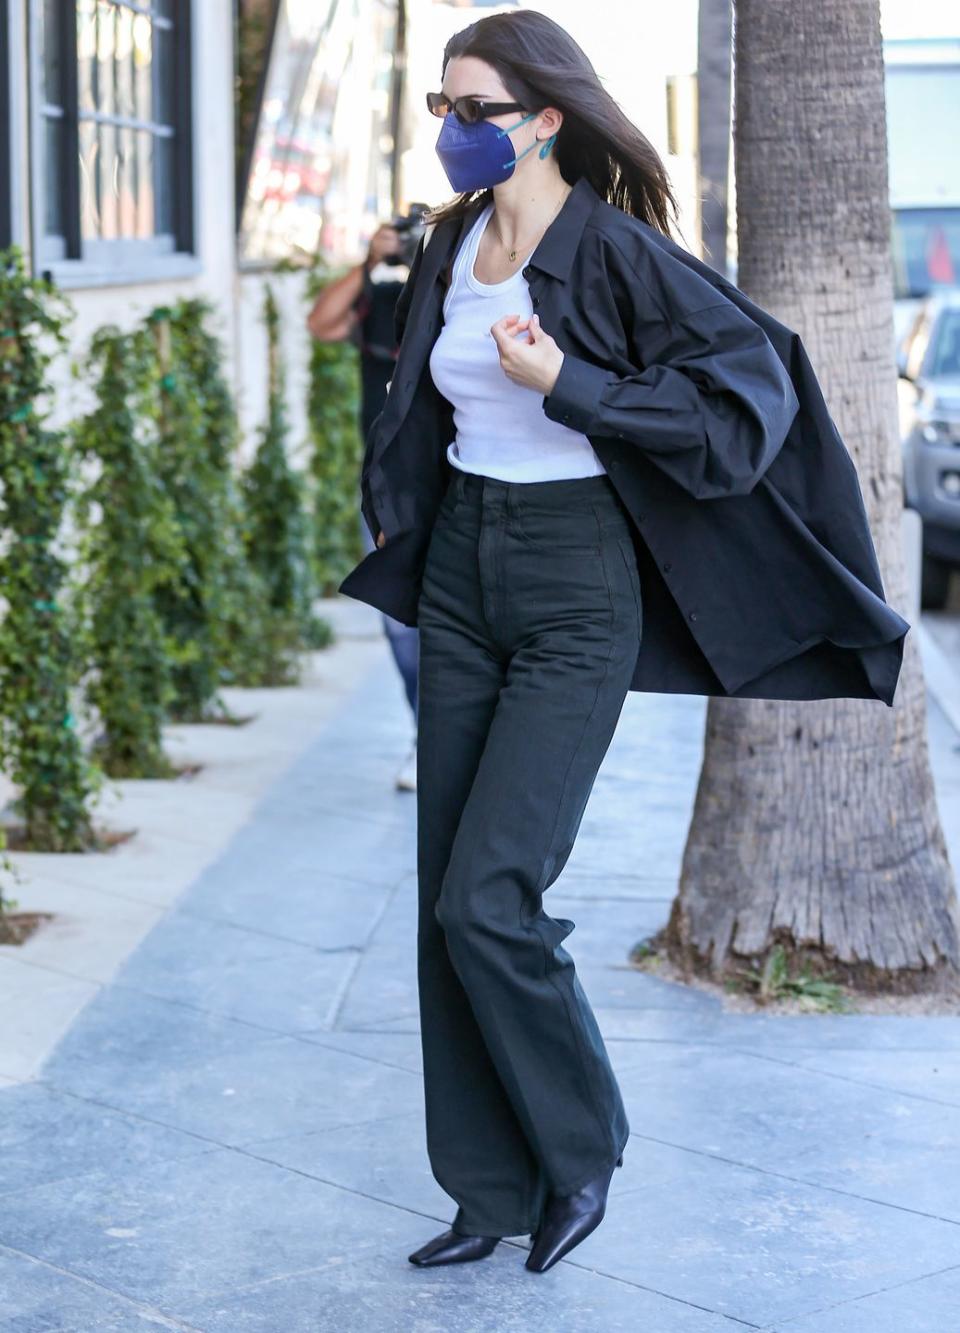 <p>Jenner was spotted out and about dressed in a menswear-inspired look on February 3.</p><p>The model kept things simple in an oversized black menswear shirt, layered over a white tank top and high-rise dark jeans. </p><p>In typical Jenner style, the fashion didn't stop there, as she effortlessly accessorised her outfit with dark, tinted, retro shades and square toe boots. </p>